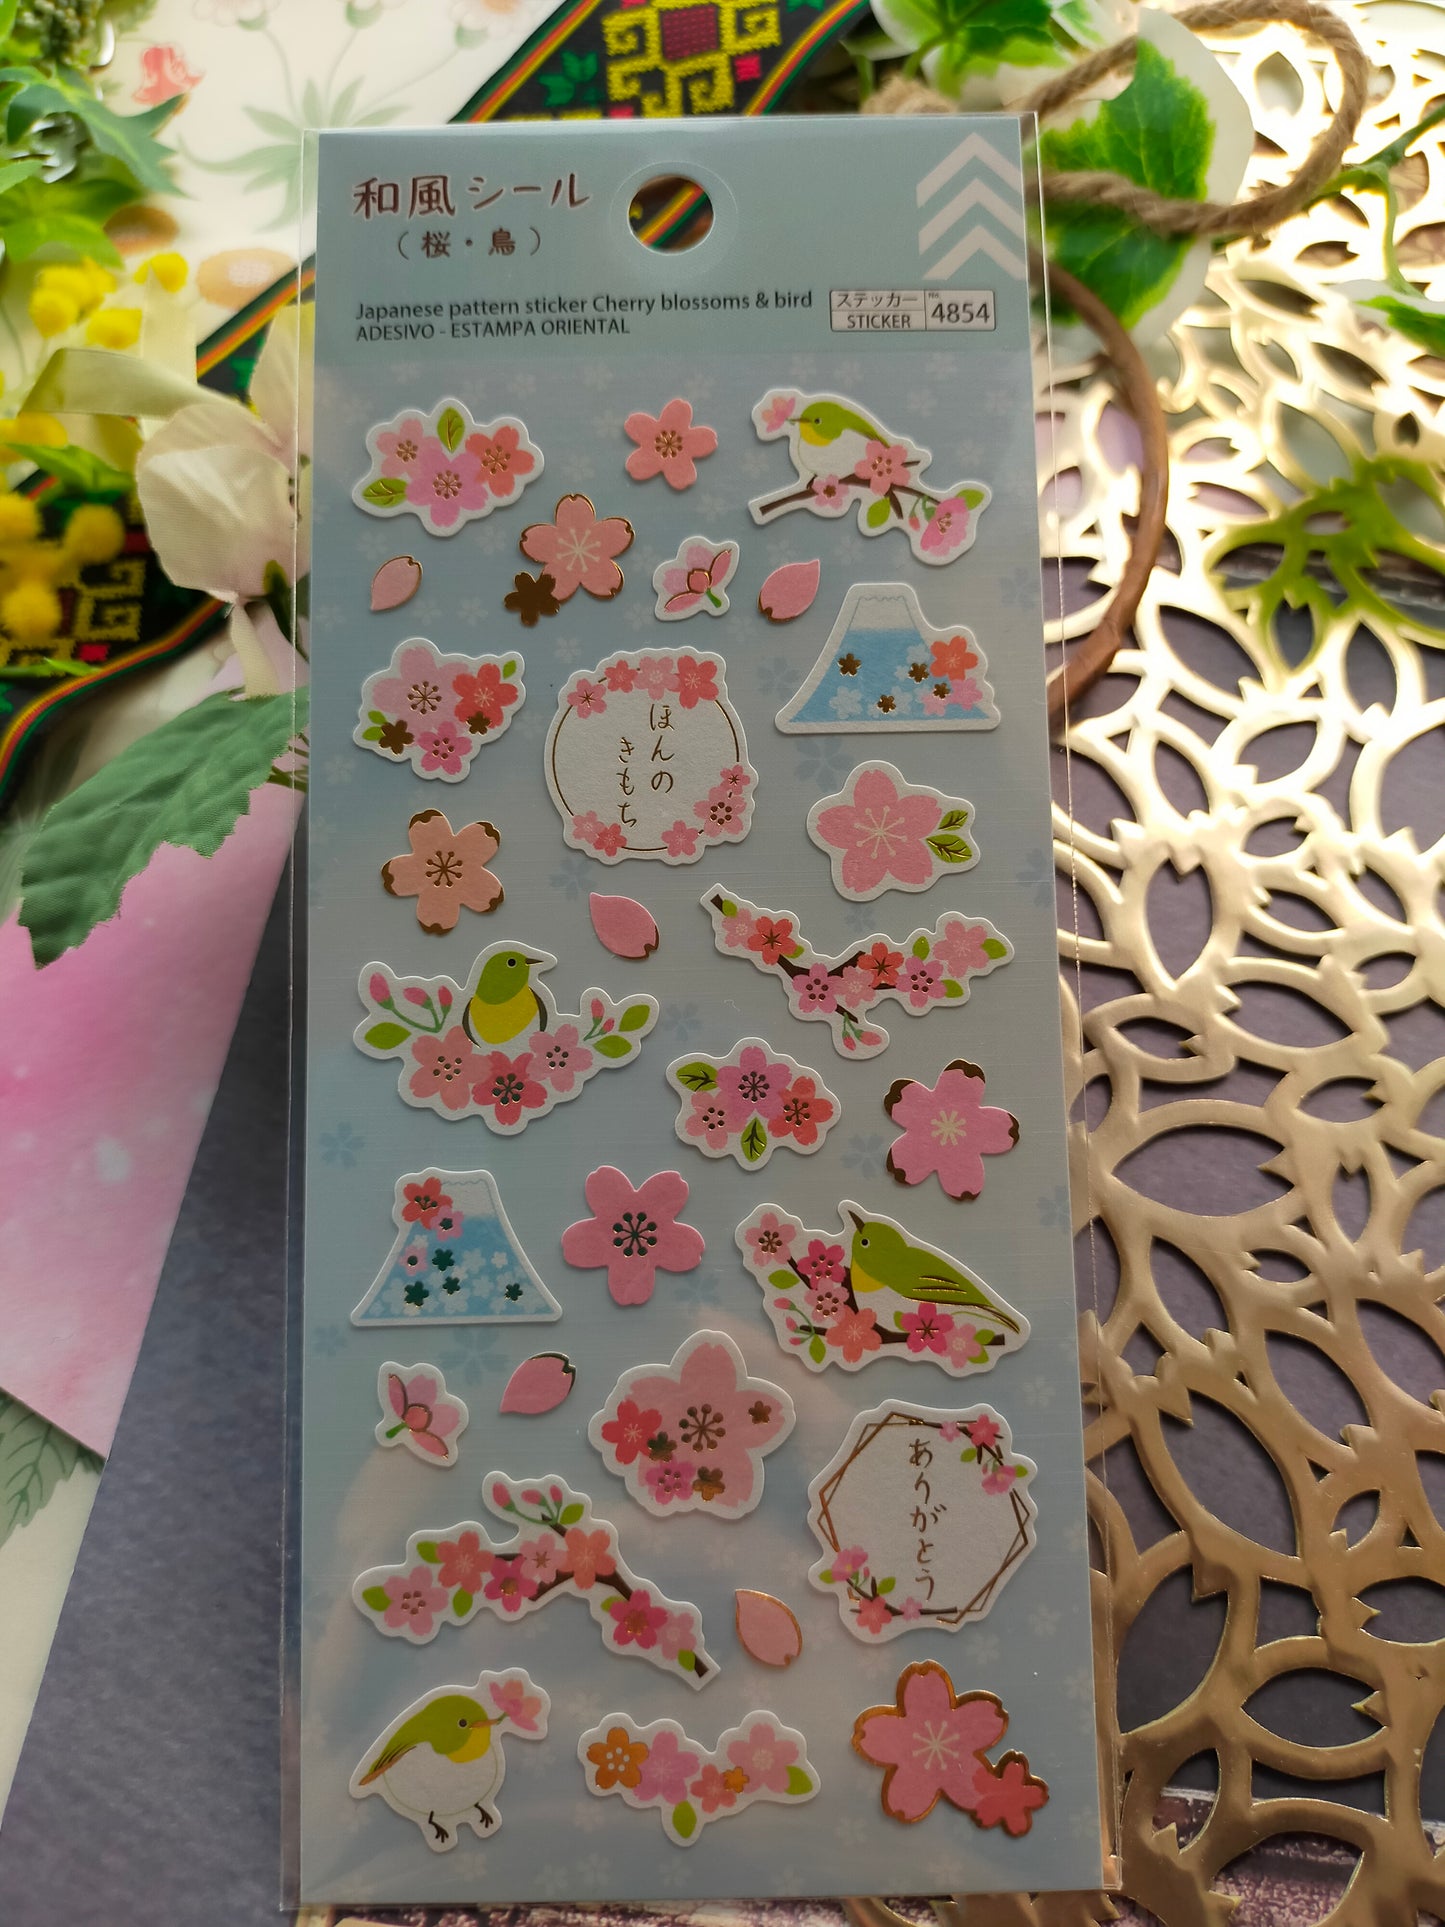 Japanese style stickers, daiso_ Small Crests / Decorative Flowers / Cherry blossoms and birds